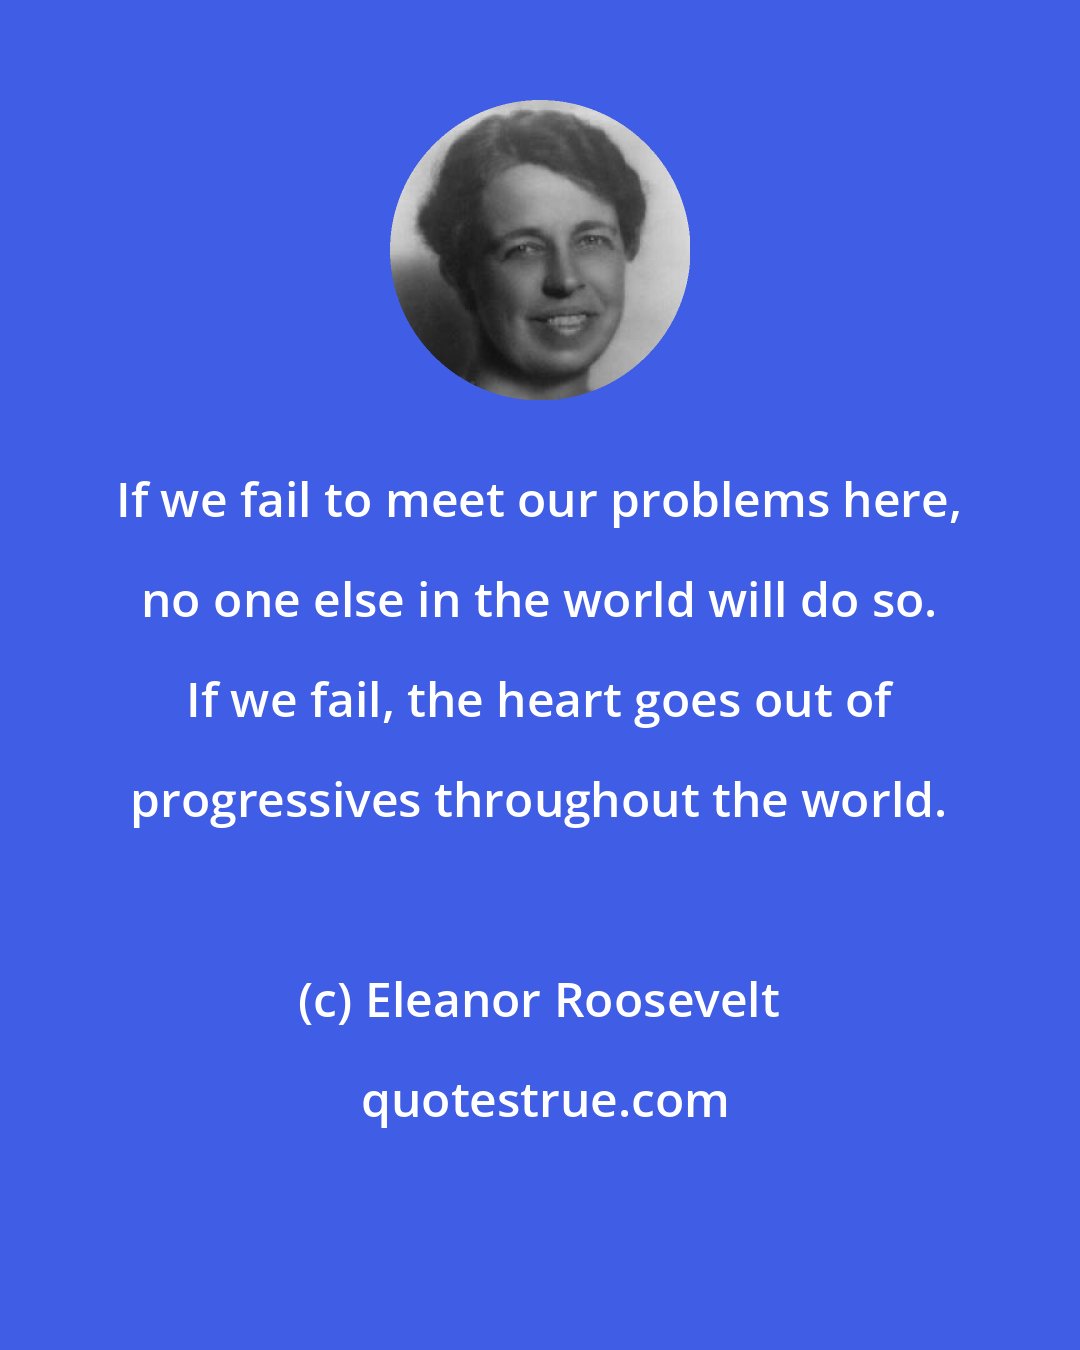 Eleanor Roosevelt: If we fail to meet our problems here, no one else in the world will do so. If we fail, the heart goes out of progressives throughout the world.